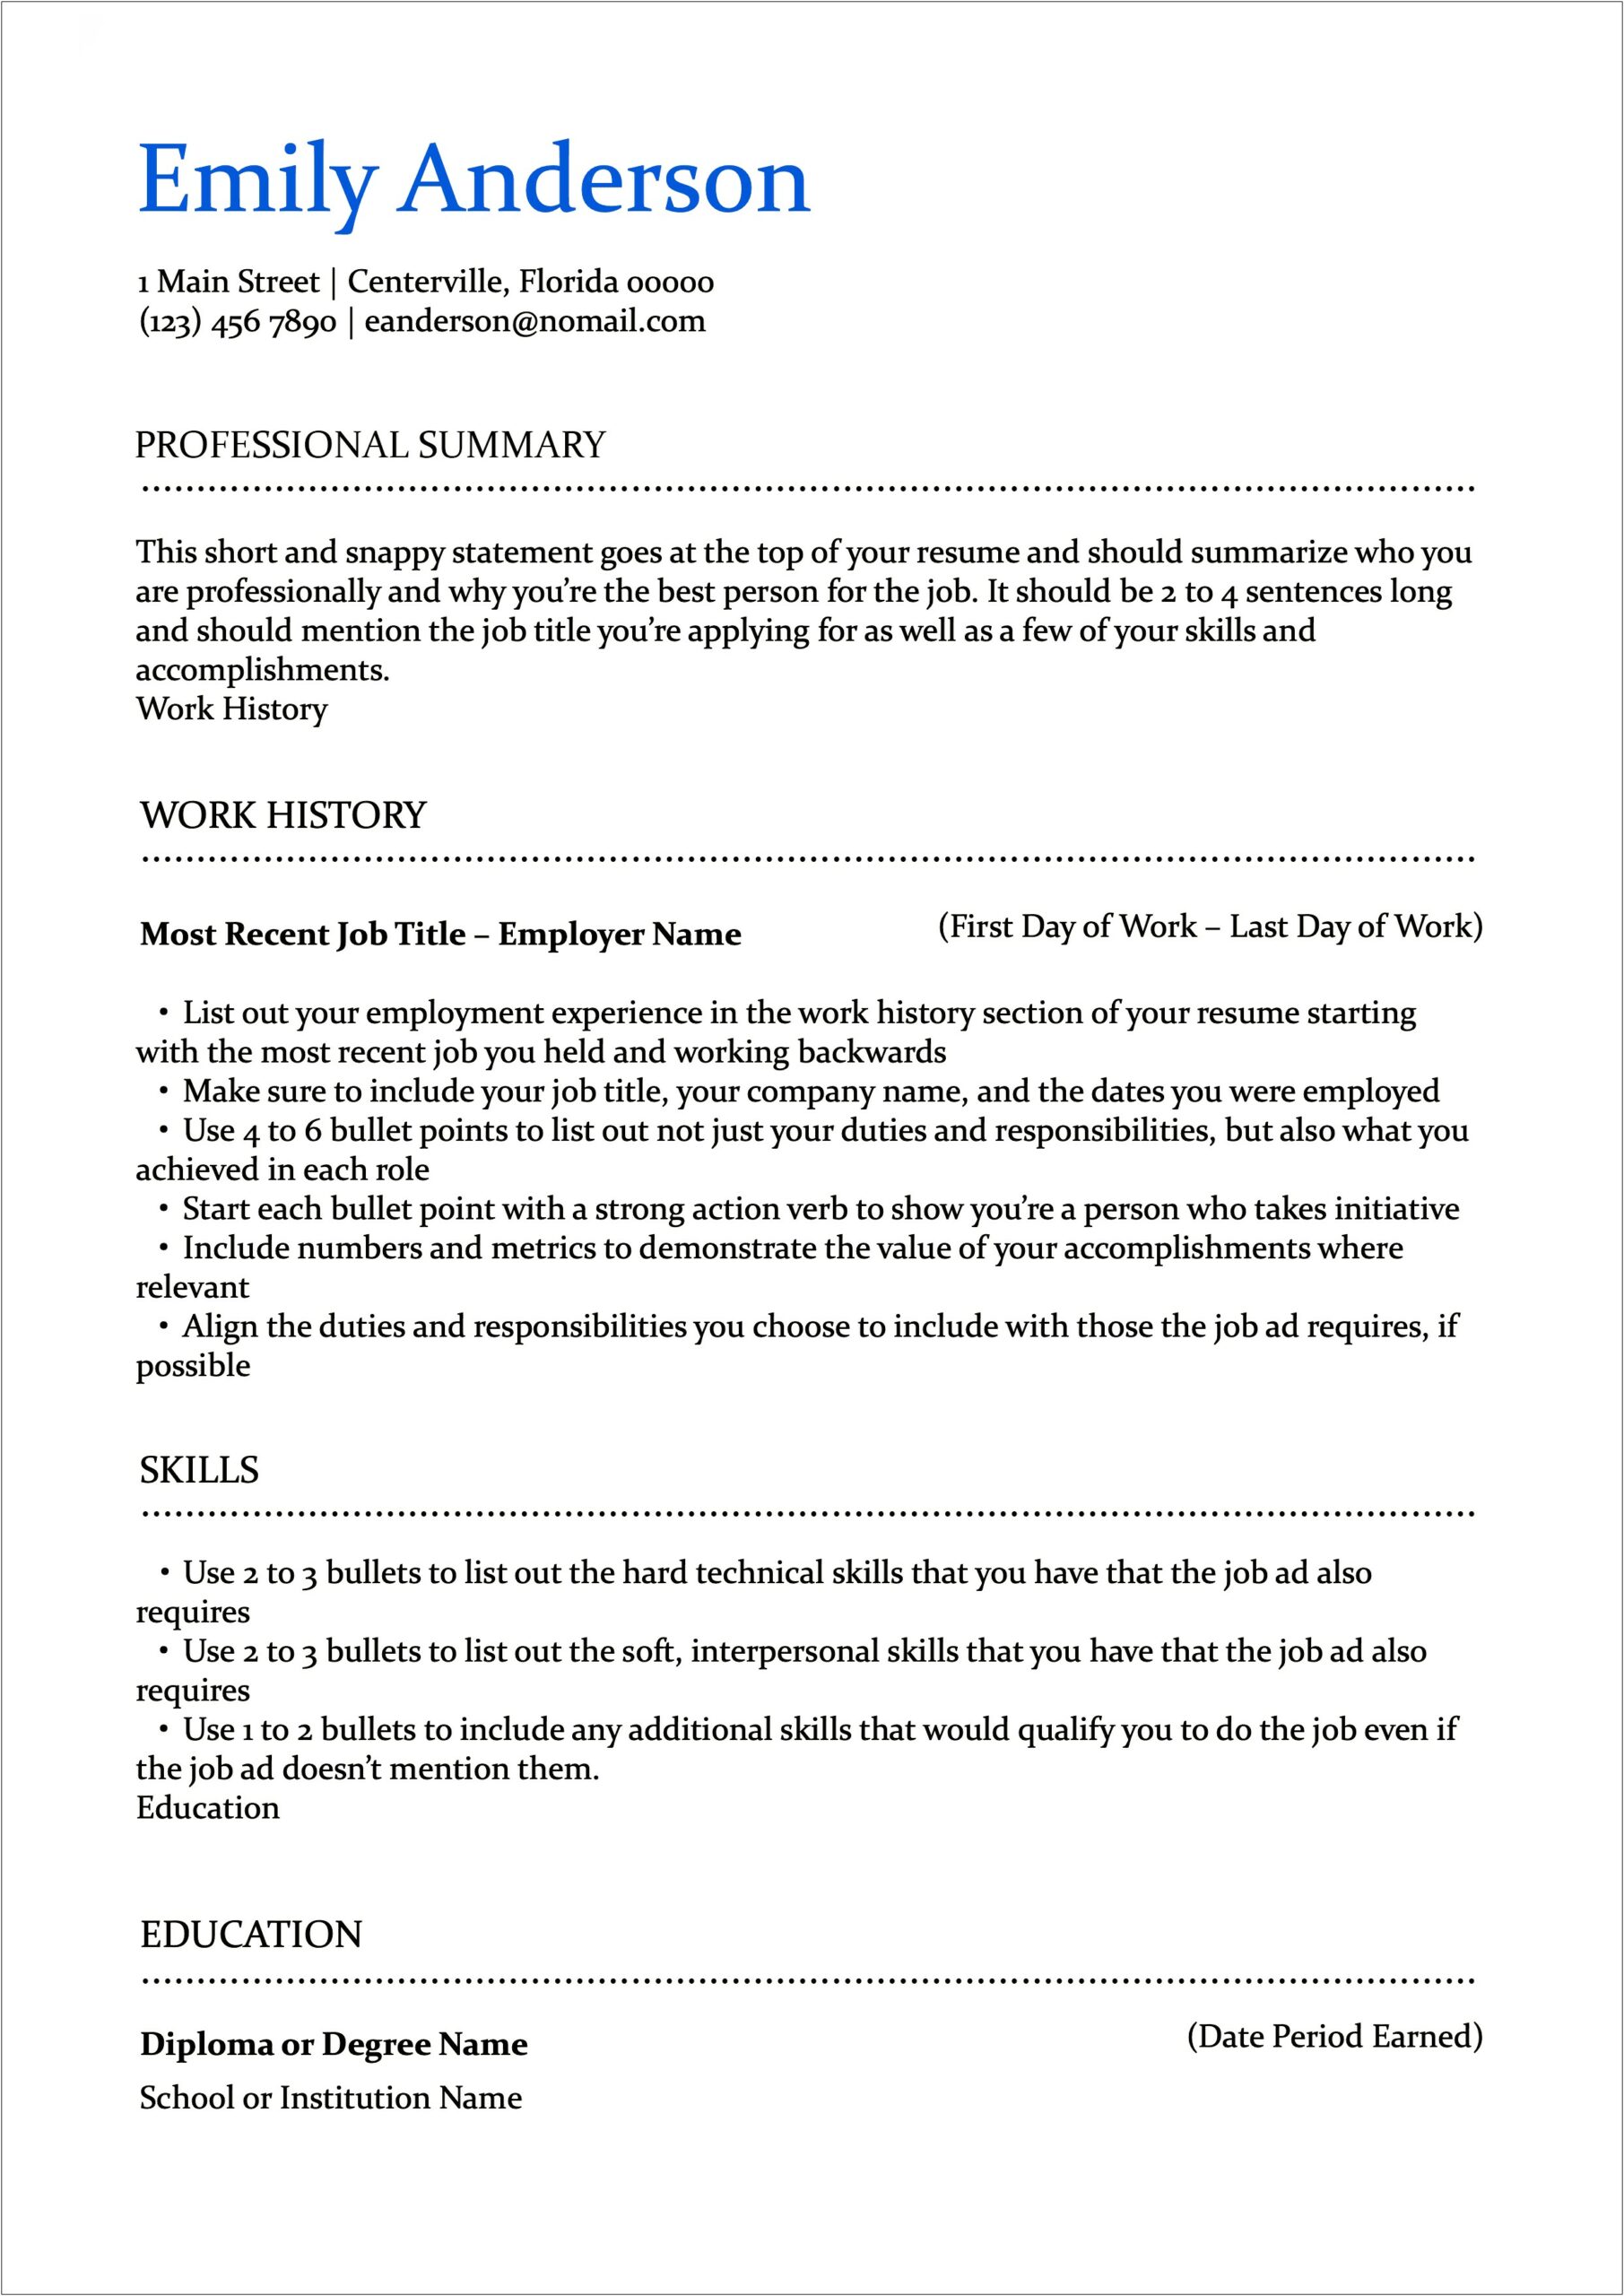 Creating A Real Estate Resume Without Experience